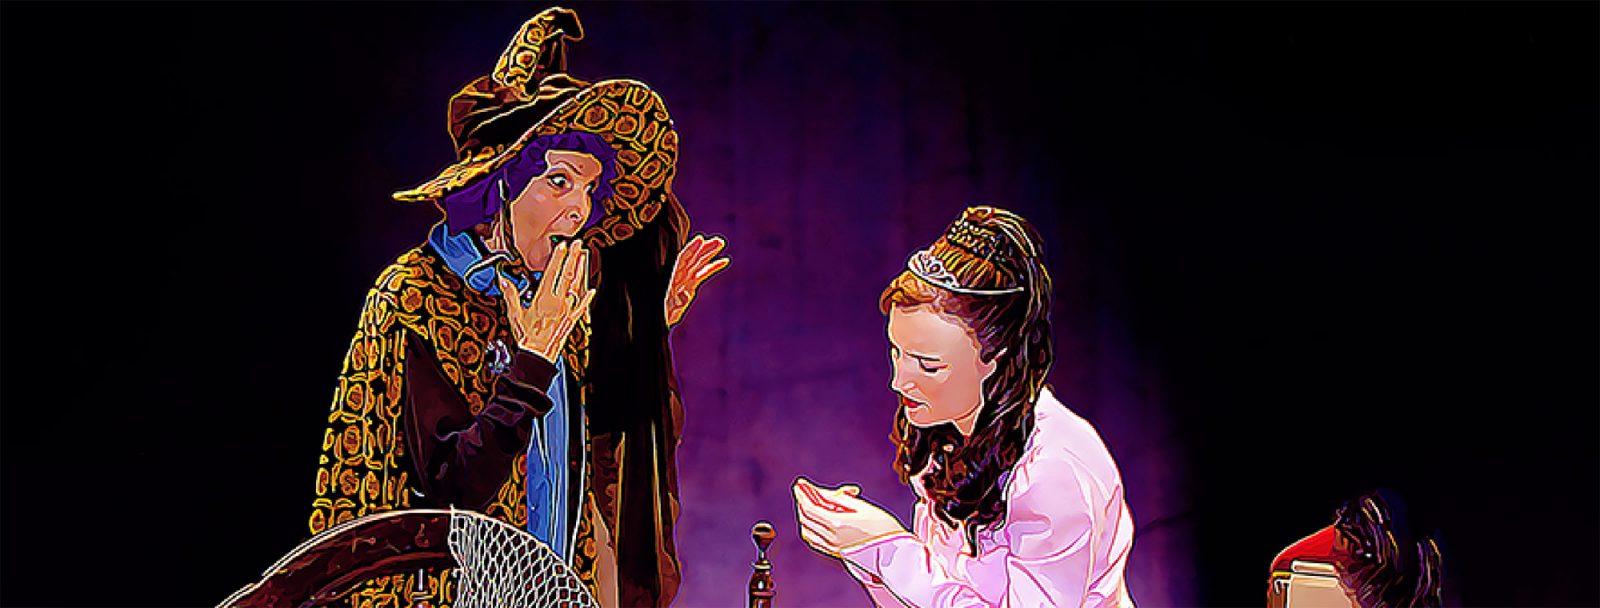 The witch with a peculiar hat gasping at Sleeping Beauty